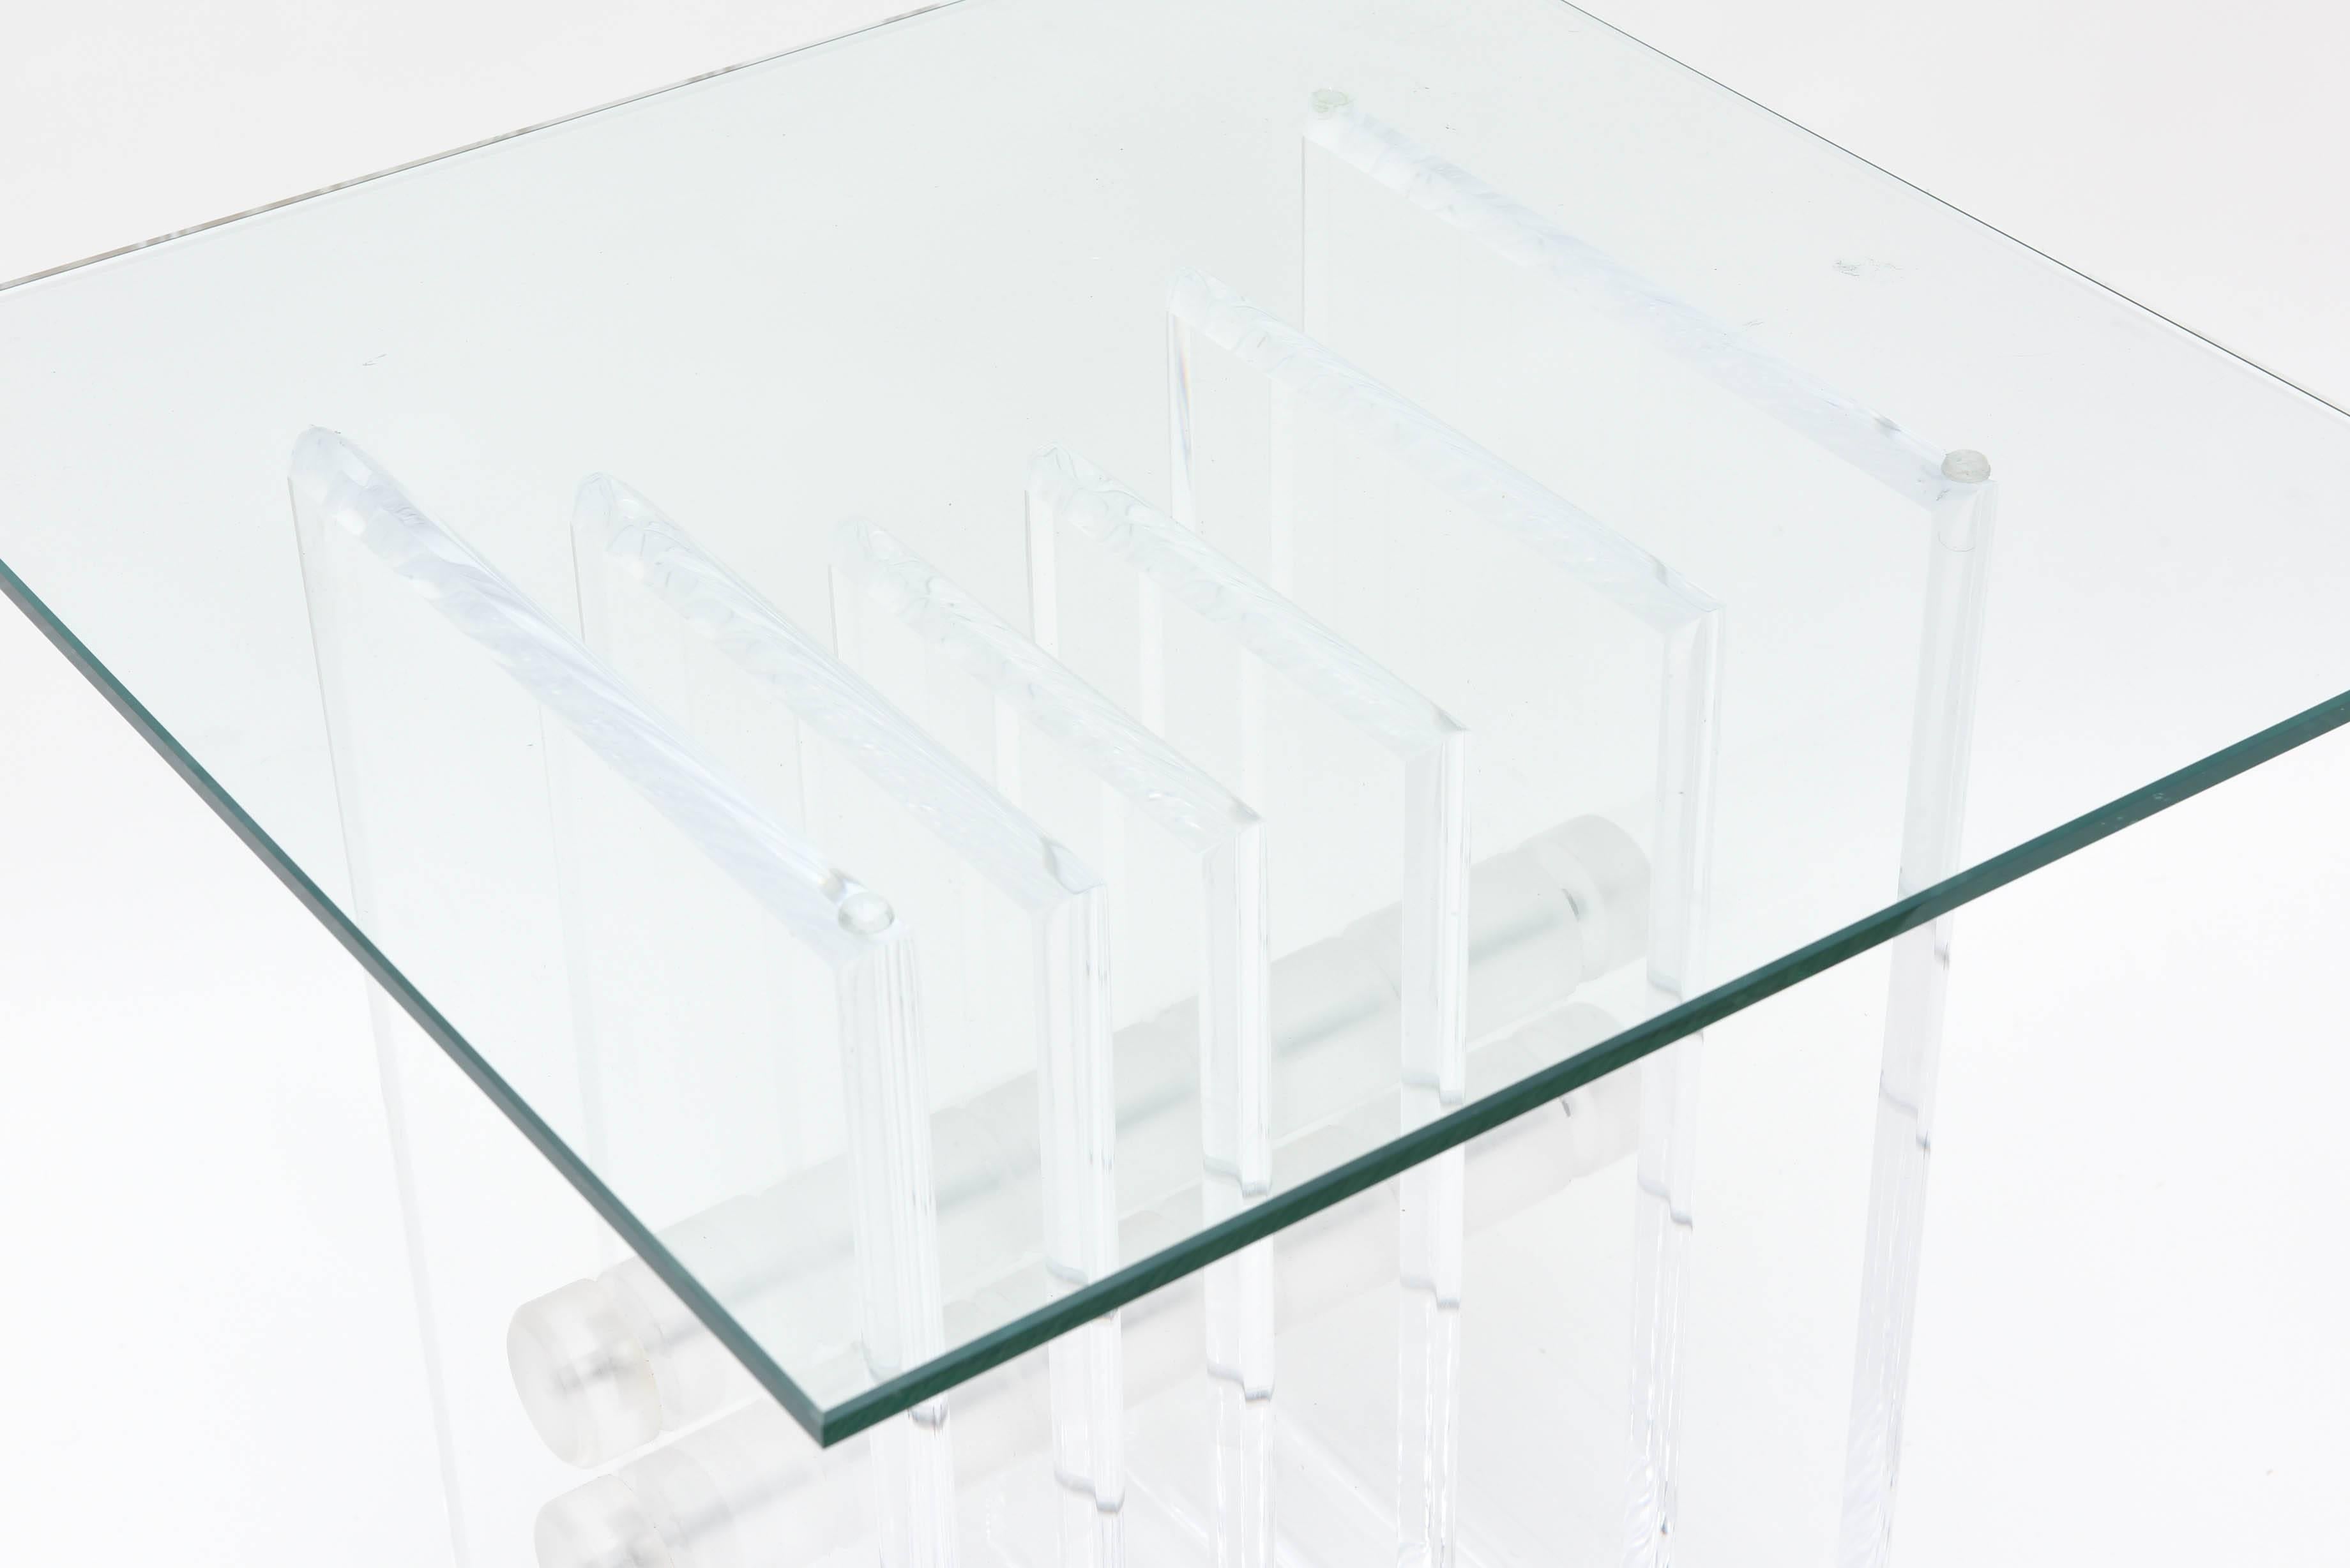 Mid-Century Modern Lucite and Glass End, Side or Drink Table consisting of heavy Lucite plates vertically arranged and held together by two cylindrical Lucite rods.
Rectangle Glass Top included.
